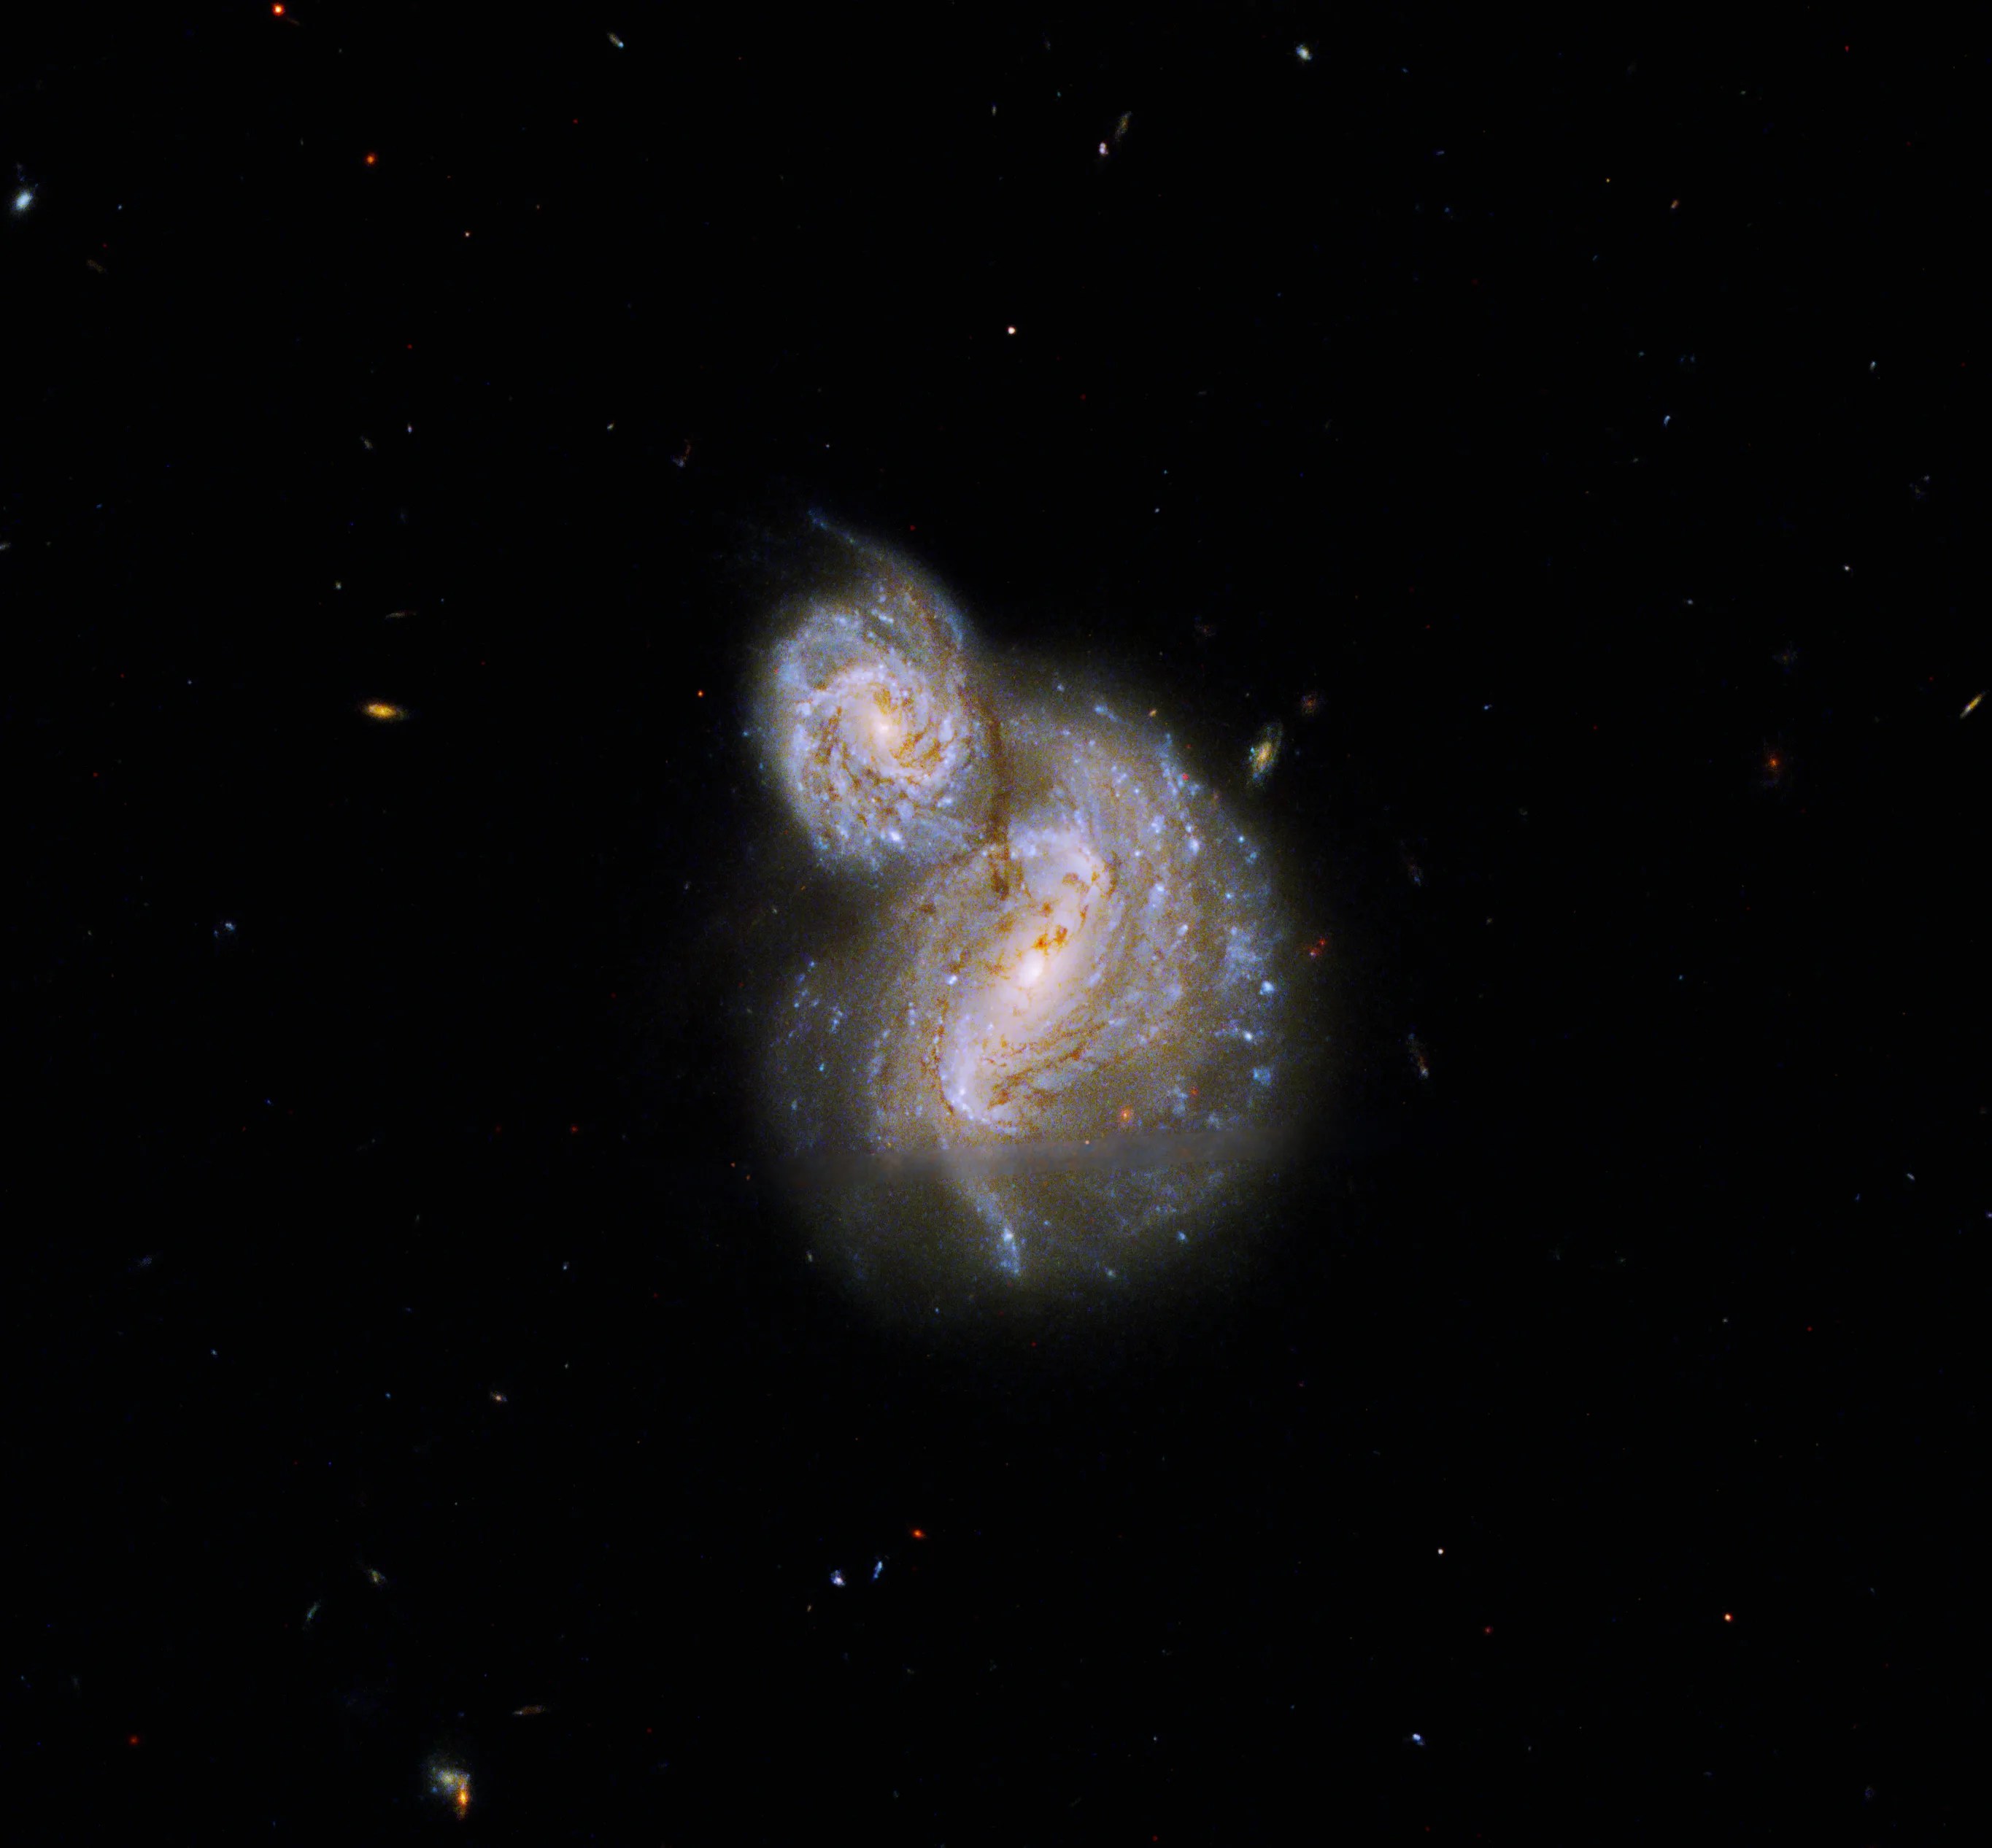 Two, face-on spiral galaxies. the larger one is centered in the image. the smaller one is superimposed on the upper left side of the larger.